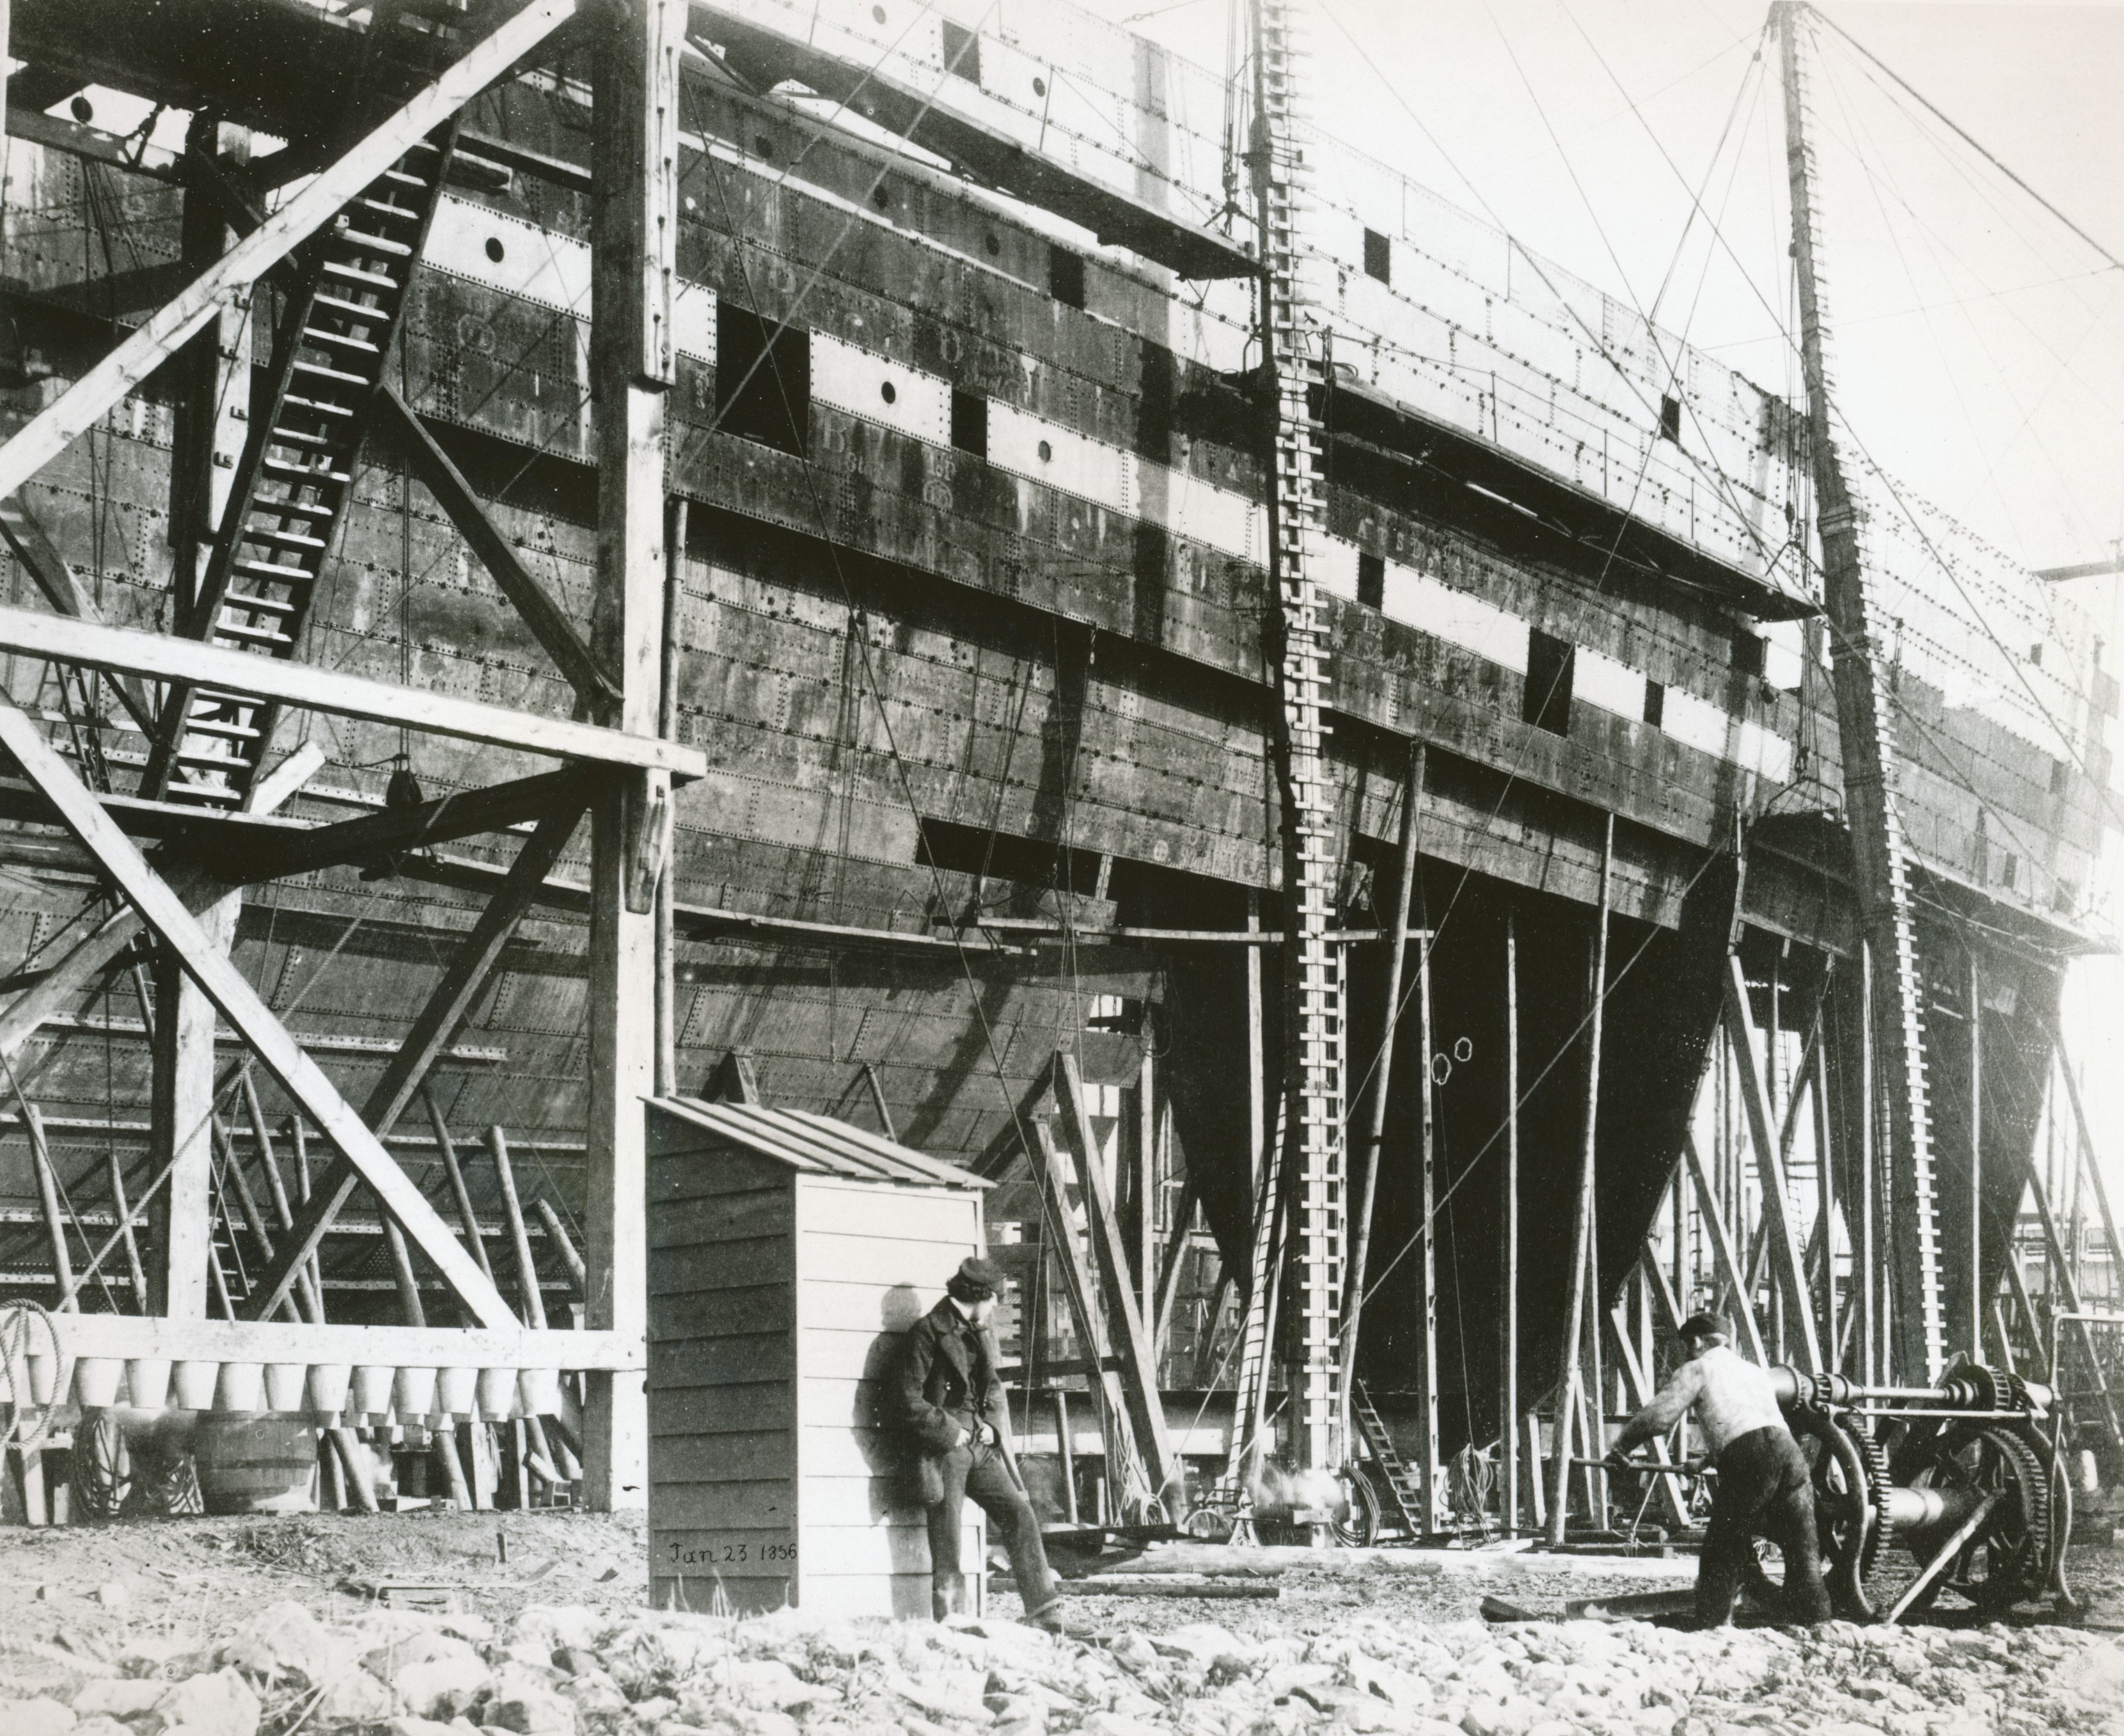 Black and white photographic print showing the SS Great Eastern under construction, 23 January 1856.